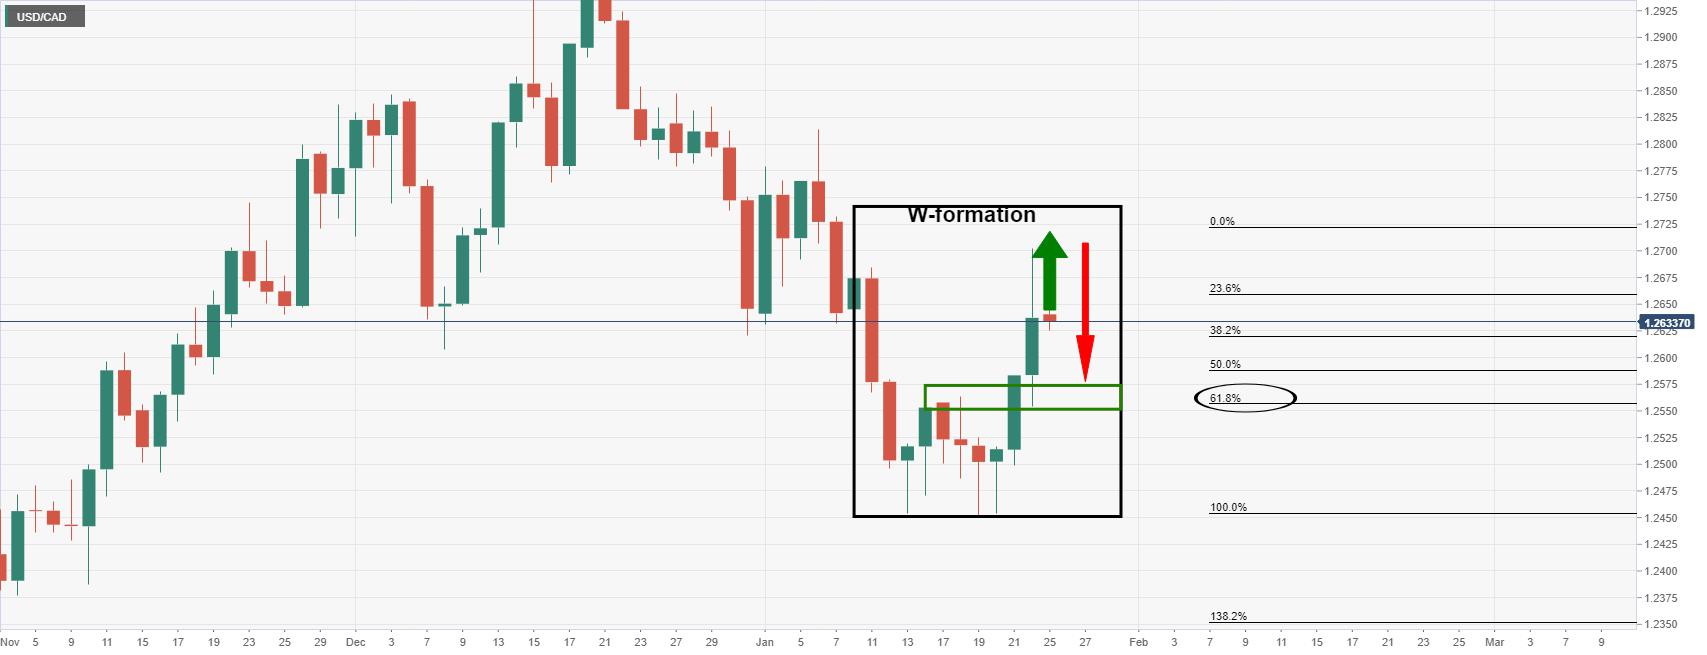 USD/CAD Price Analysis: Bulls looking for a discount from an hourly correction, eye 1.2720